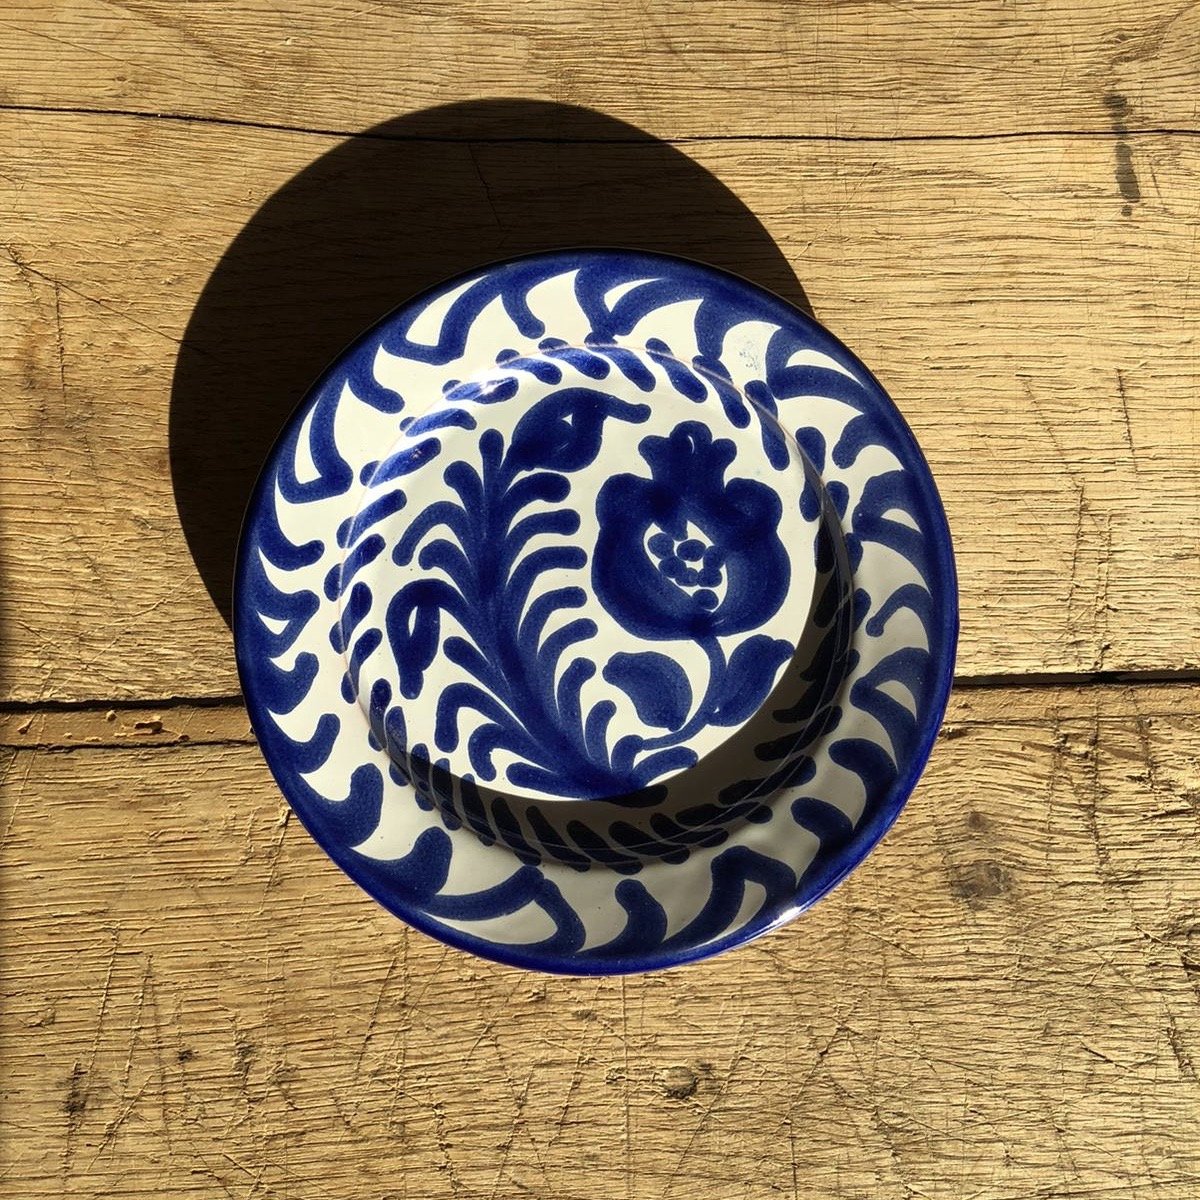 Casa Azul Mini Plate with Hand-painted Designs